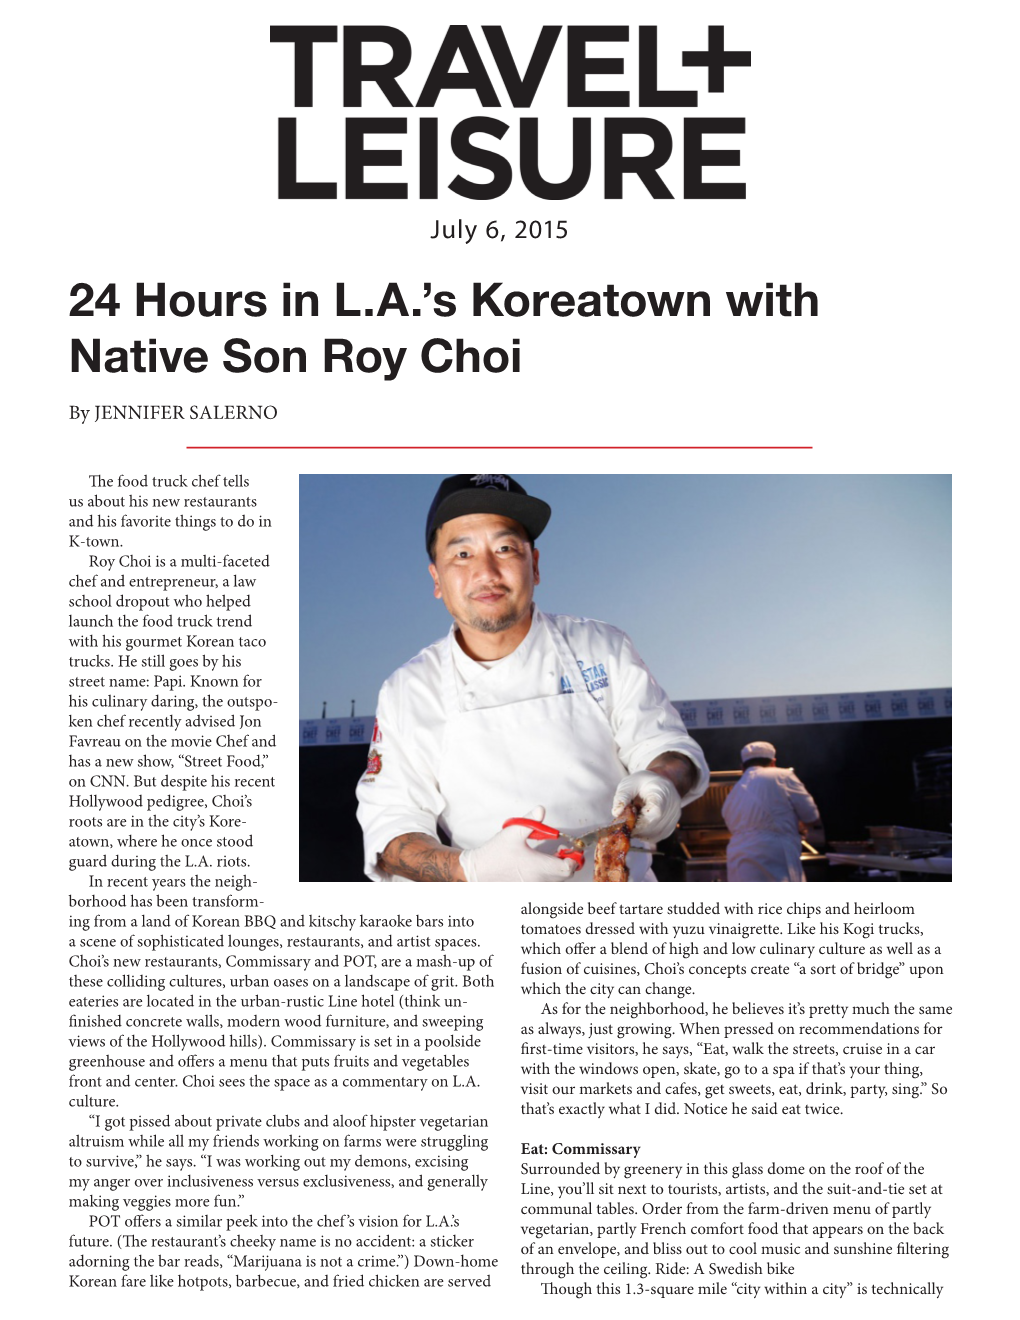 24 Hours in L.A.'S Koreatown with Native Son Roy